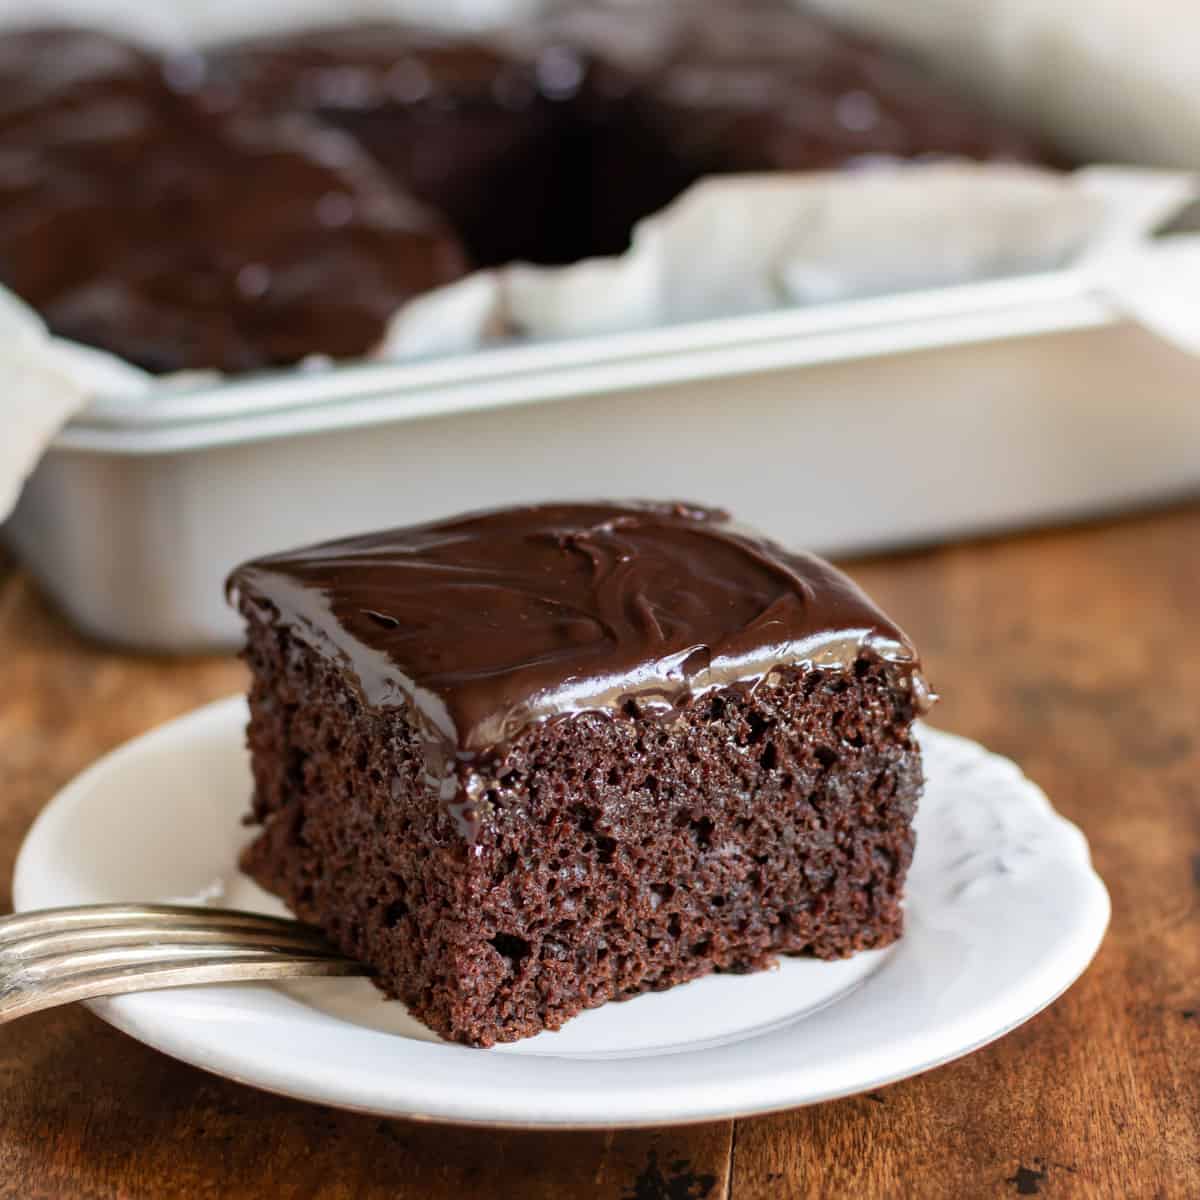 Chocolate Crazy Cake (Wacky Cake) - Home in the Finger Lakes